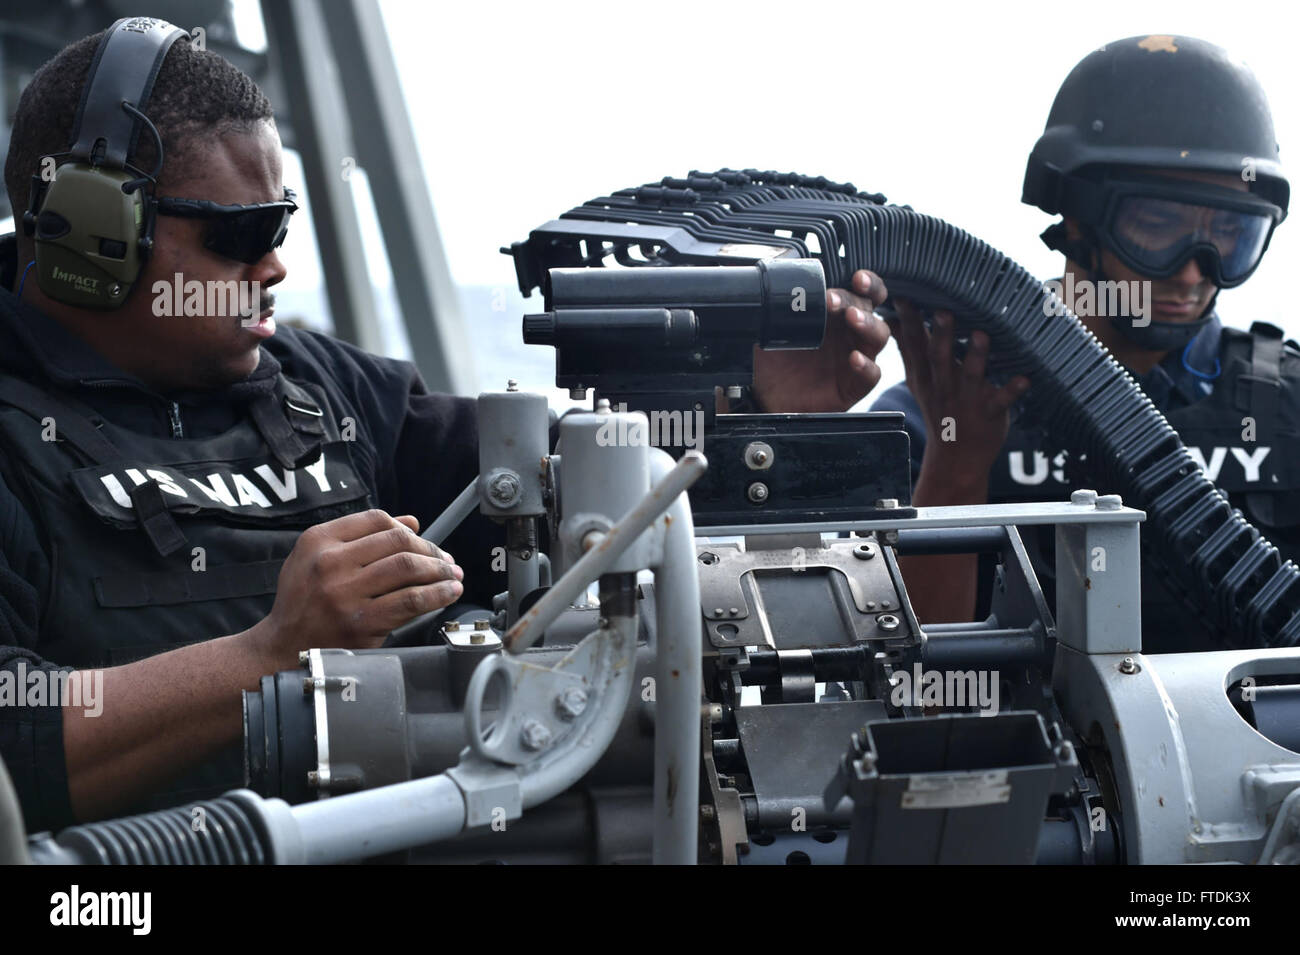 160104-N-XT273-183 MEDITERRANEAN SEA (Jan. 4, 2016) Gunner's Mate 2nd Class Alex Scott and Gunner's Mate 3rd Class Joseph Martinez remove the feed shoot from a 25mm gun aboard USS Ross (DDG 71) after a live fire training exercise in the Mediterranean Sea Jan. 4, 2016. Ross, an Arleigh Burke-class guided-missile destroyer, forward deployed to Rota, Spain, is conducting a routine patrol in the U.S. 6th Fleet area of operations in support of U.S. national security interests in Europe. (U.S. Navy photo by Mass Communication Specialist 2nd Class Justin Stumberg/Released) Stock Photo